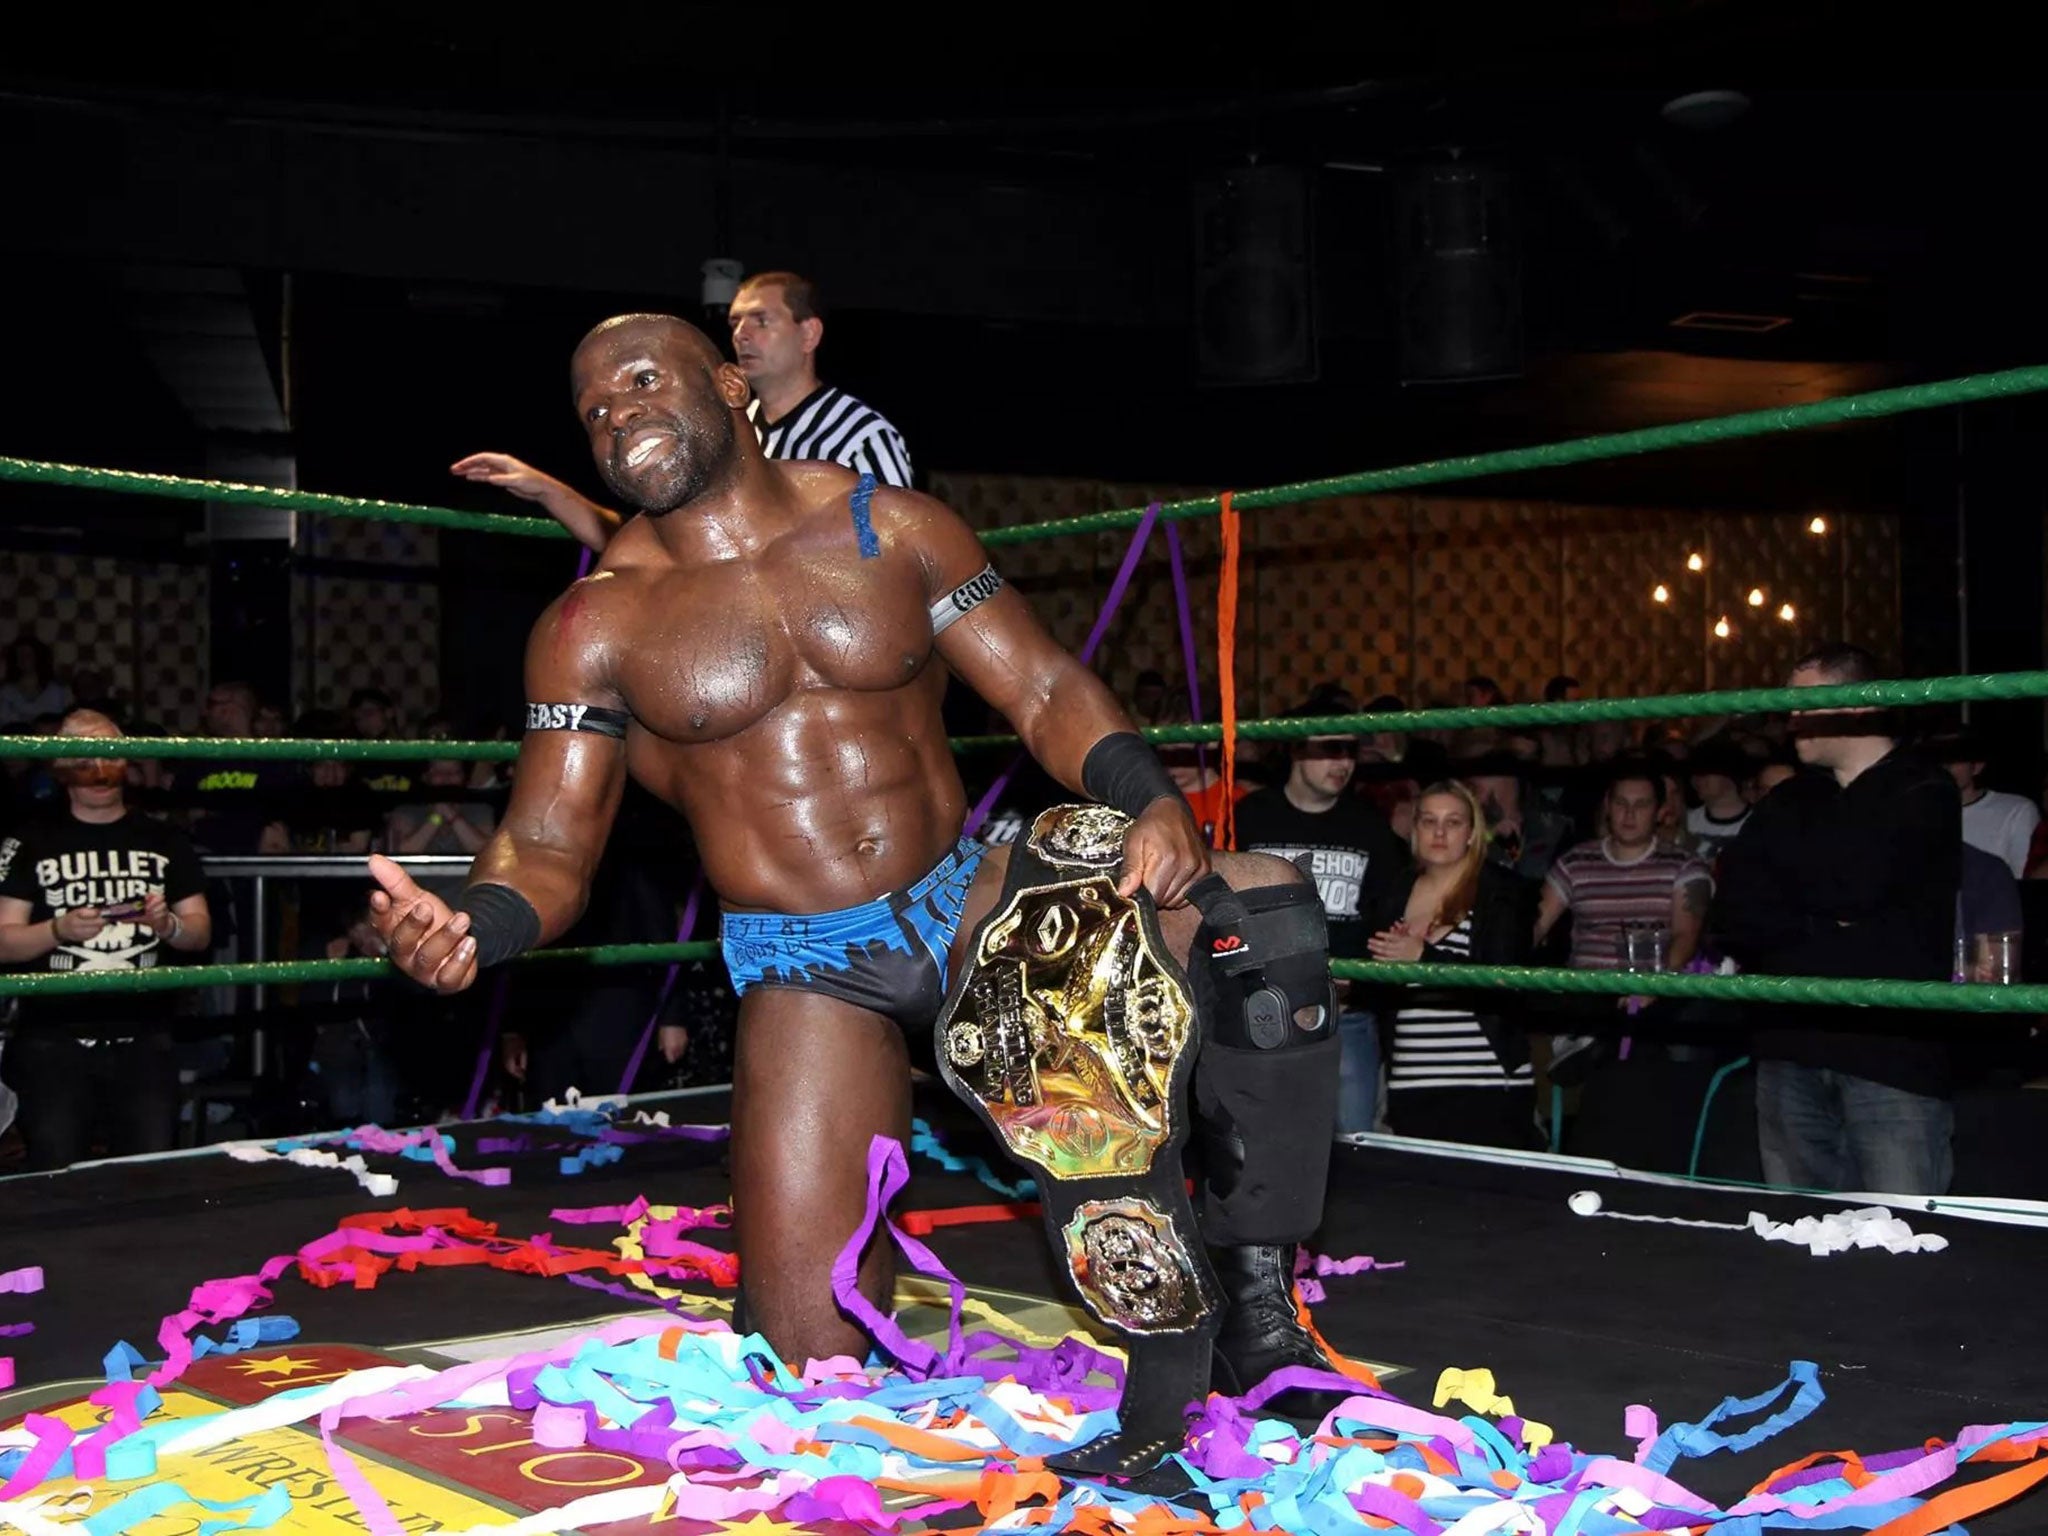 Uhaa Nation, who is tipped to be the next breakout global star, wins the PCW Heavyweight Championship